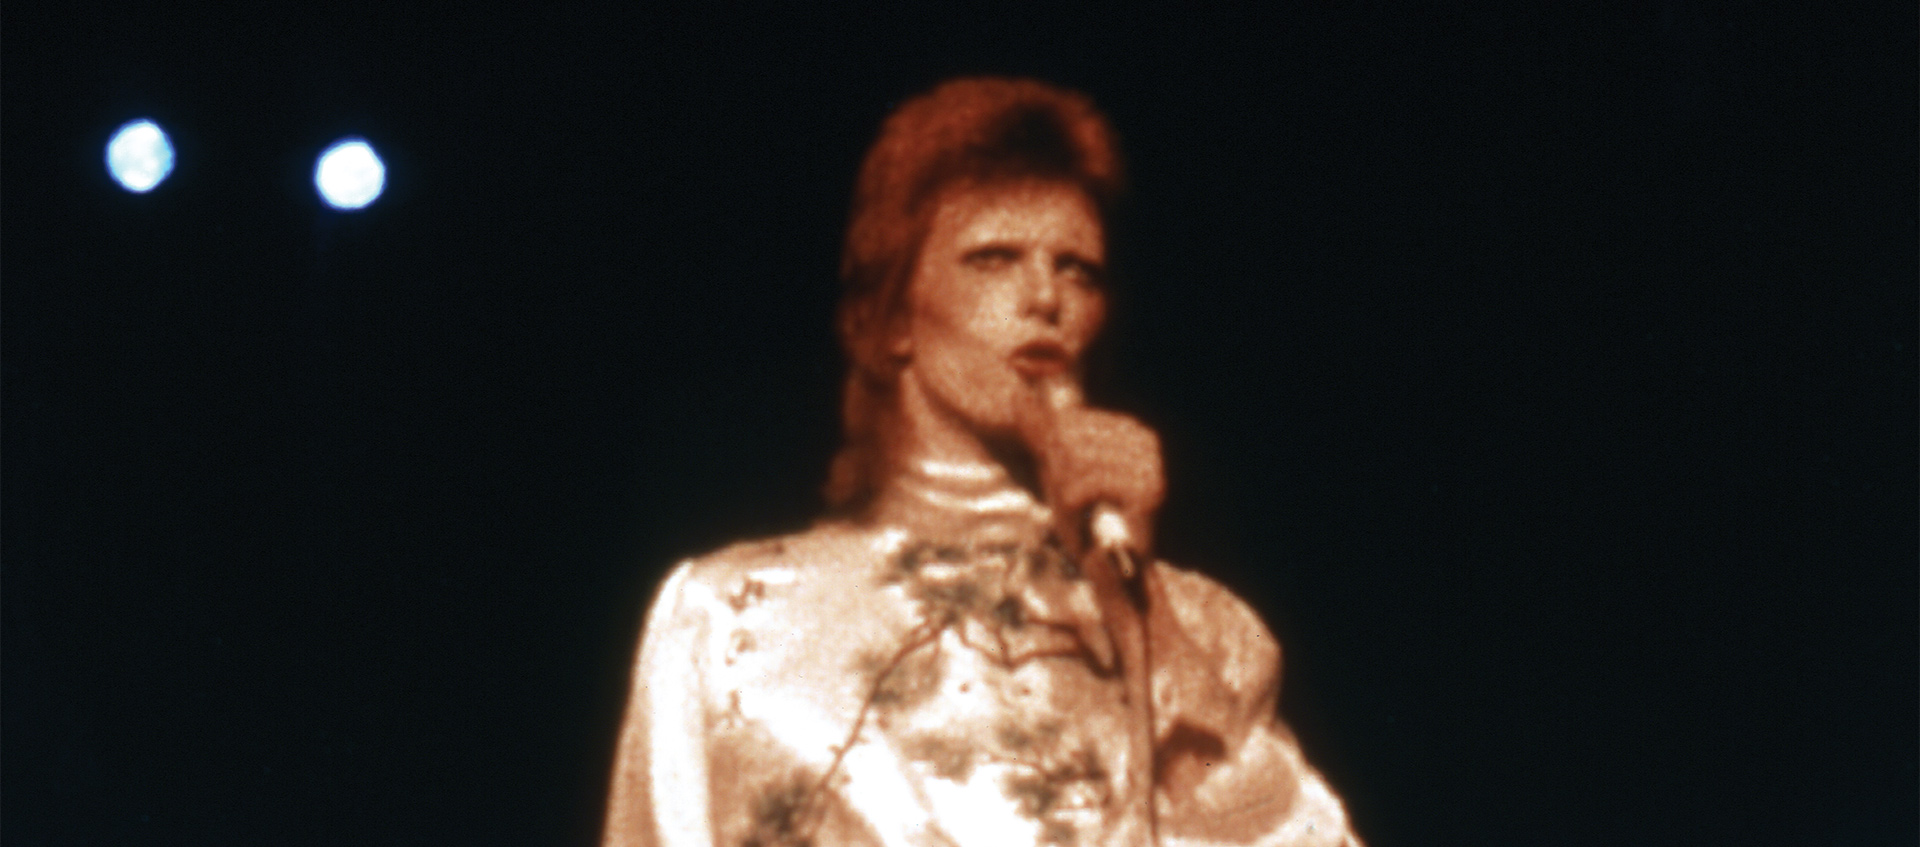 Ziggy Stardust & the Spiders From Mars: The Motion Picture